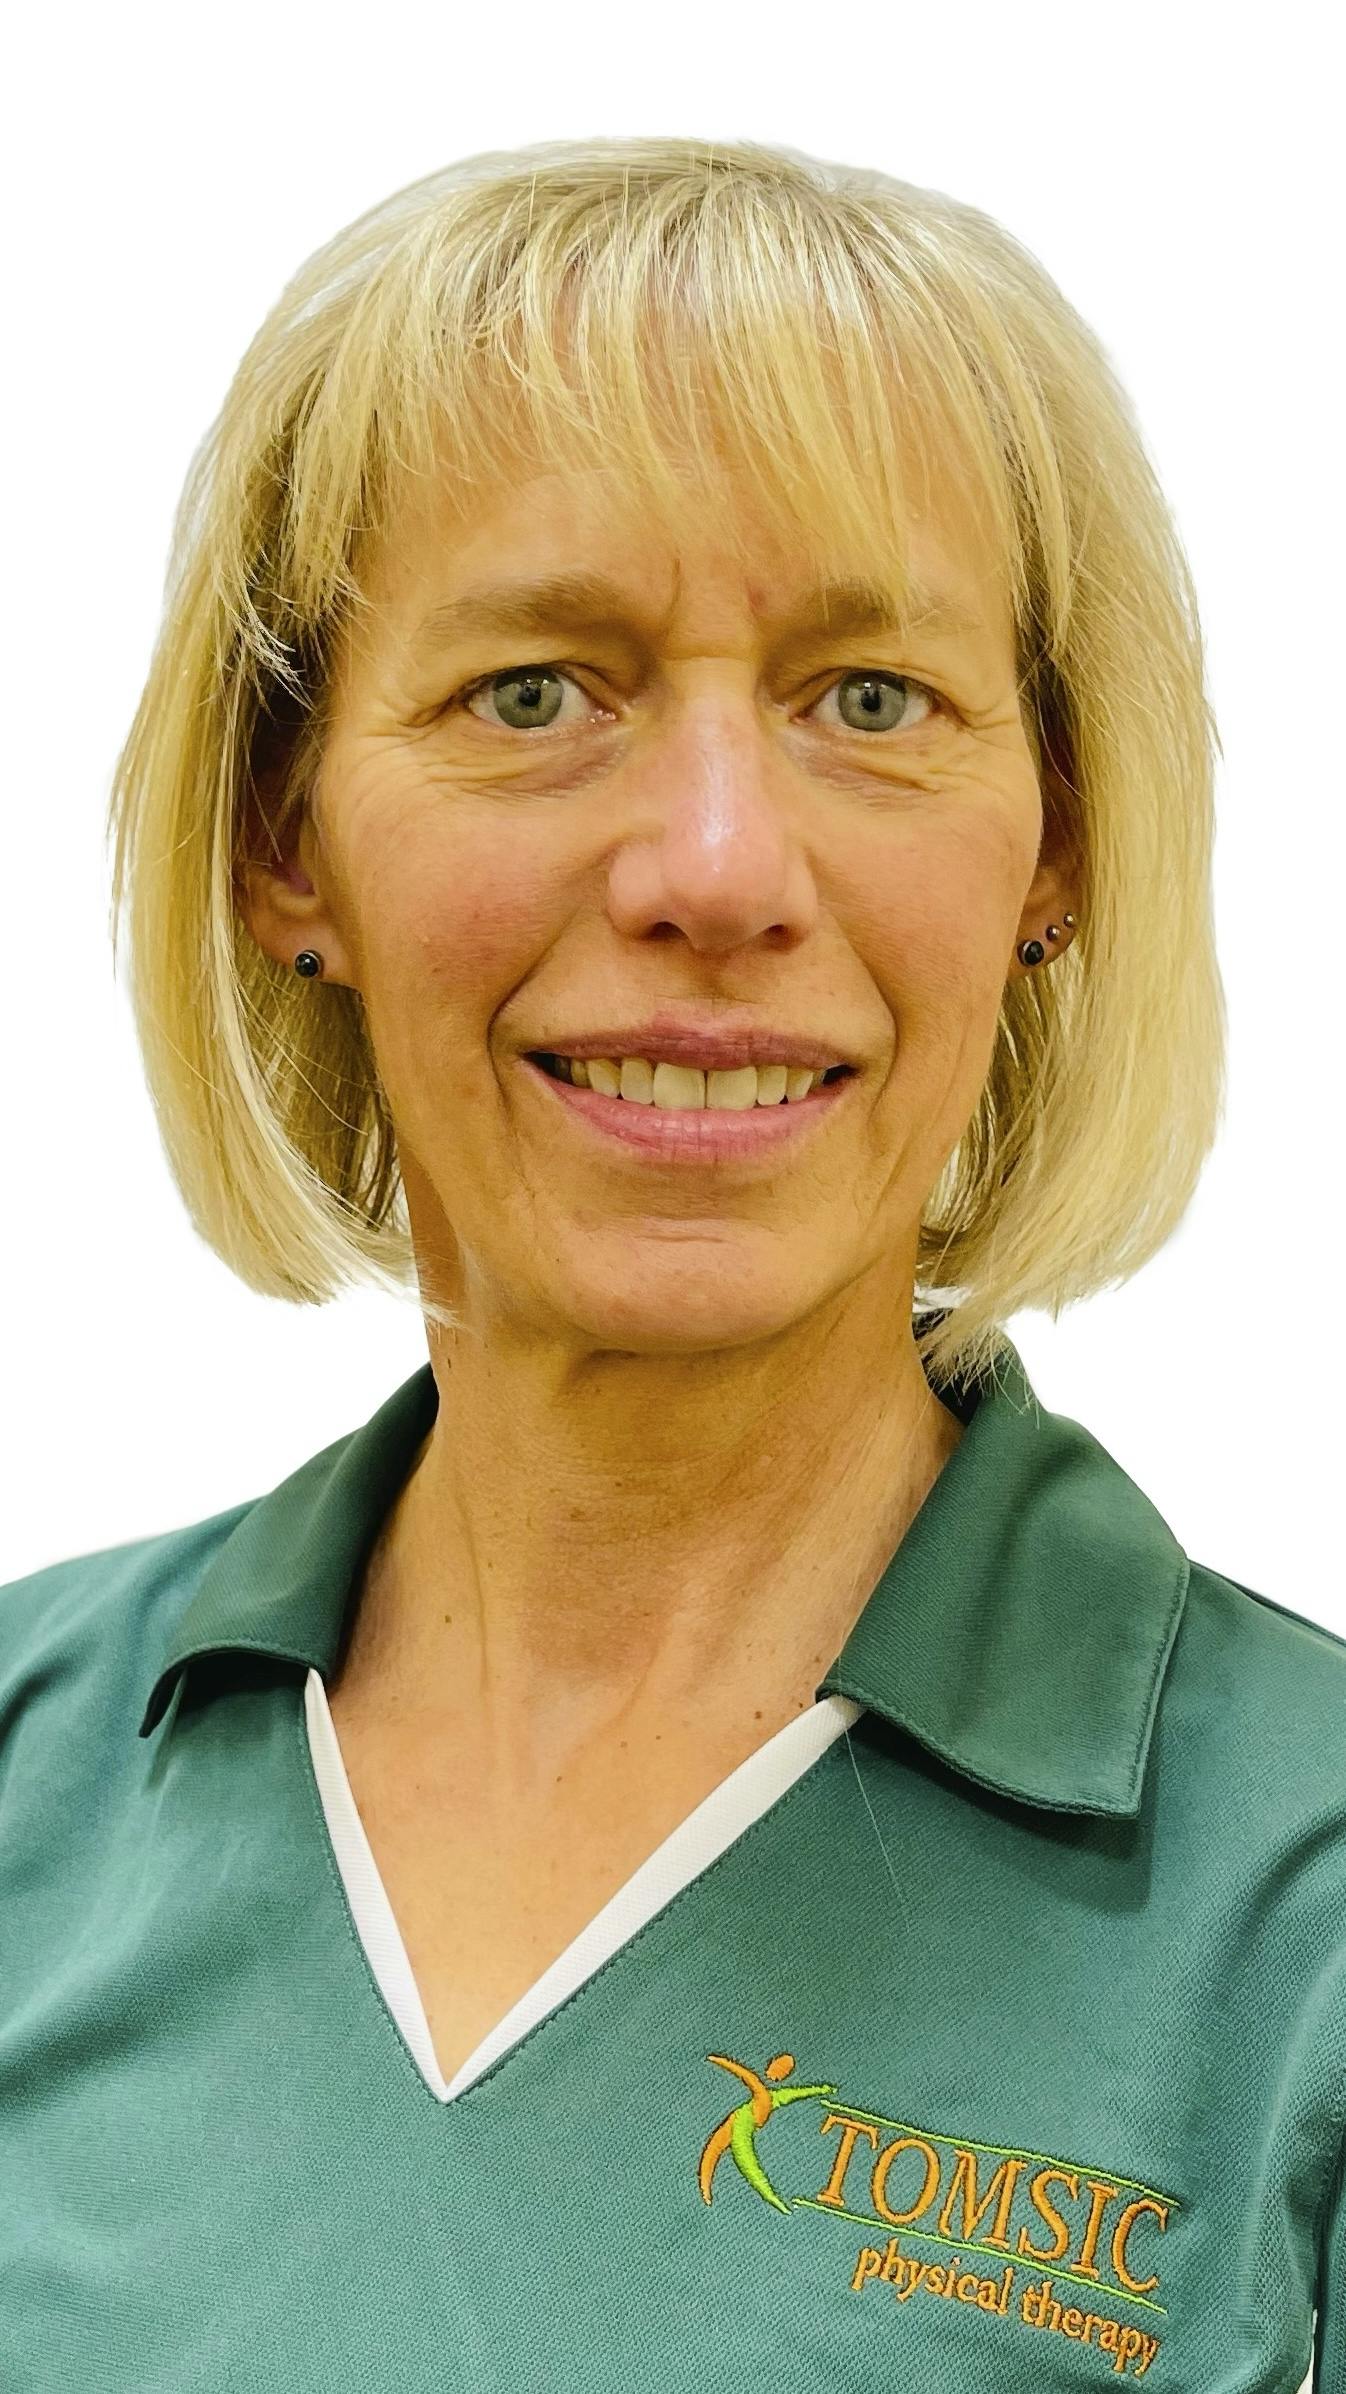 Dr. Ellen Tomsic - Doctor of Physical Therapy in Durango CO at Tomsic Physical Therapy